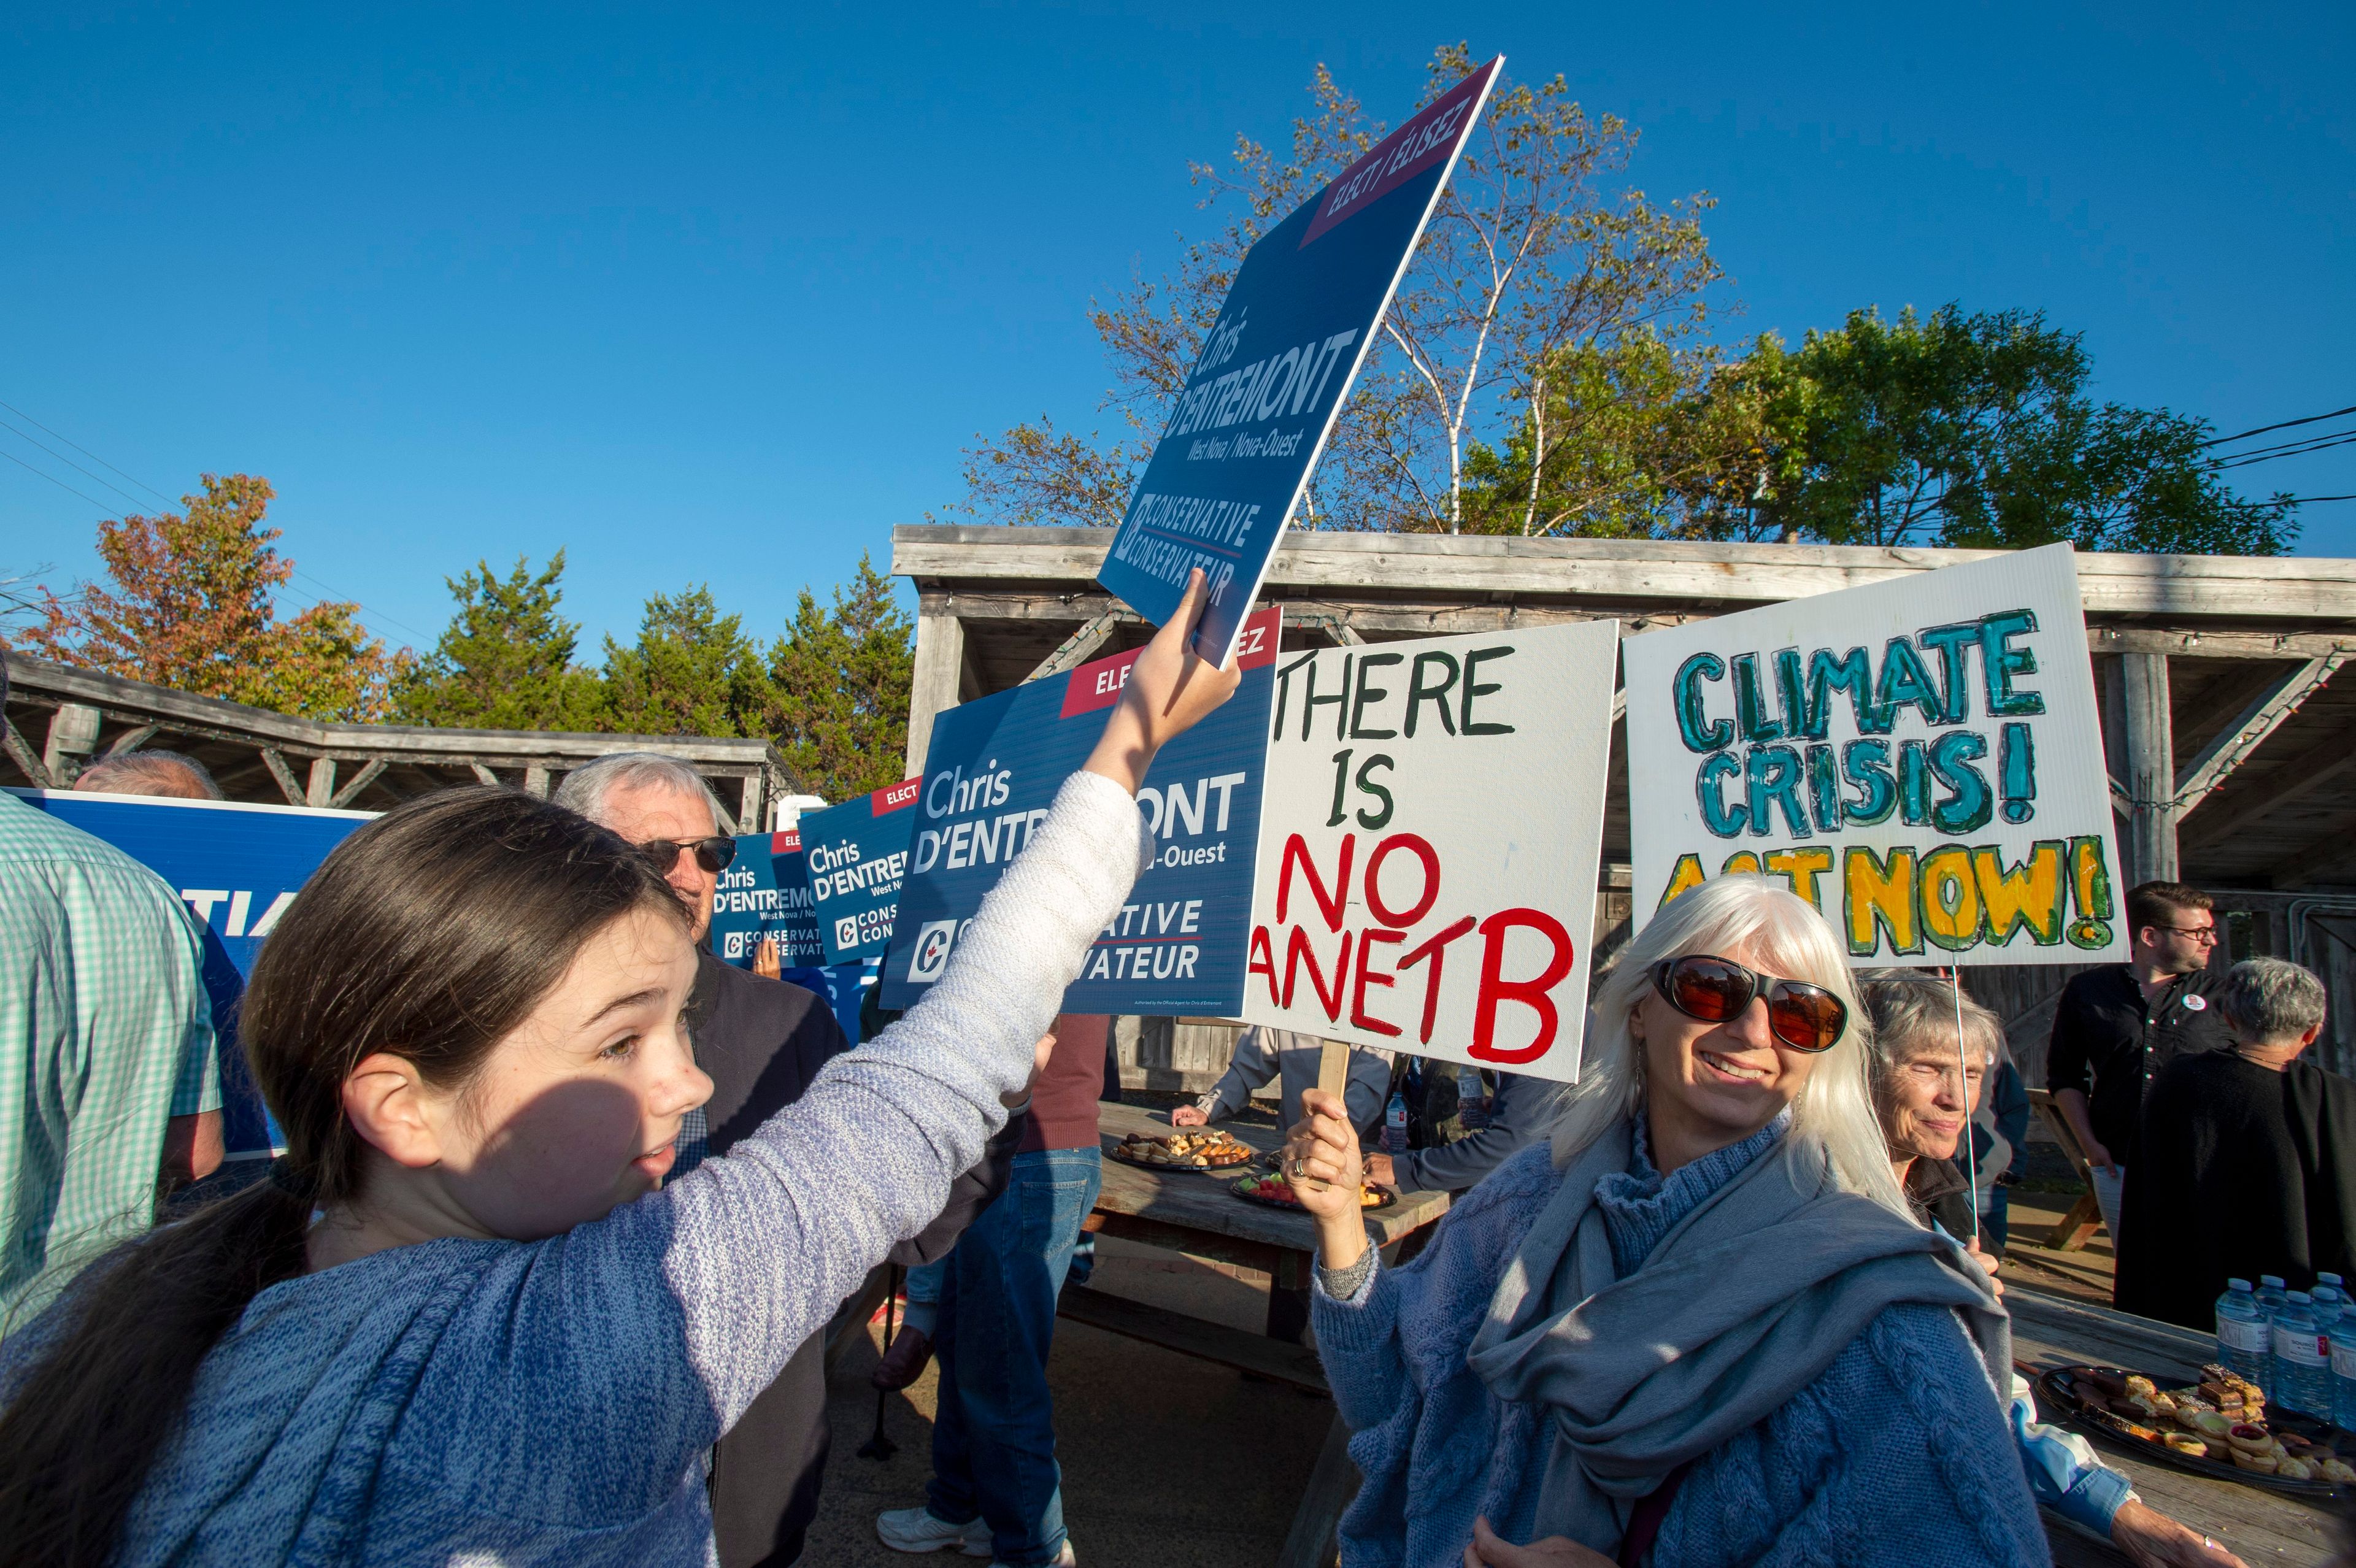 Conservative supporters try to block Climate Change signs before party leader Andrew Scheer's arrival at a rally in Annapolis Royal, N.S., on Sept. 20, 2019. (Frank Gunn/CP)